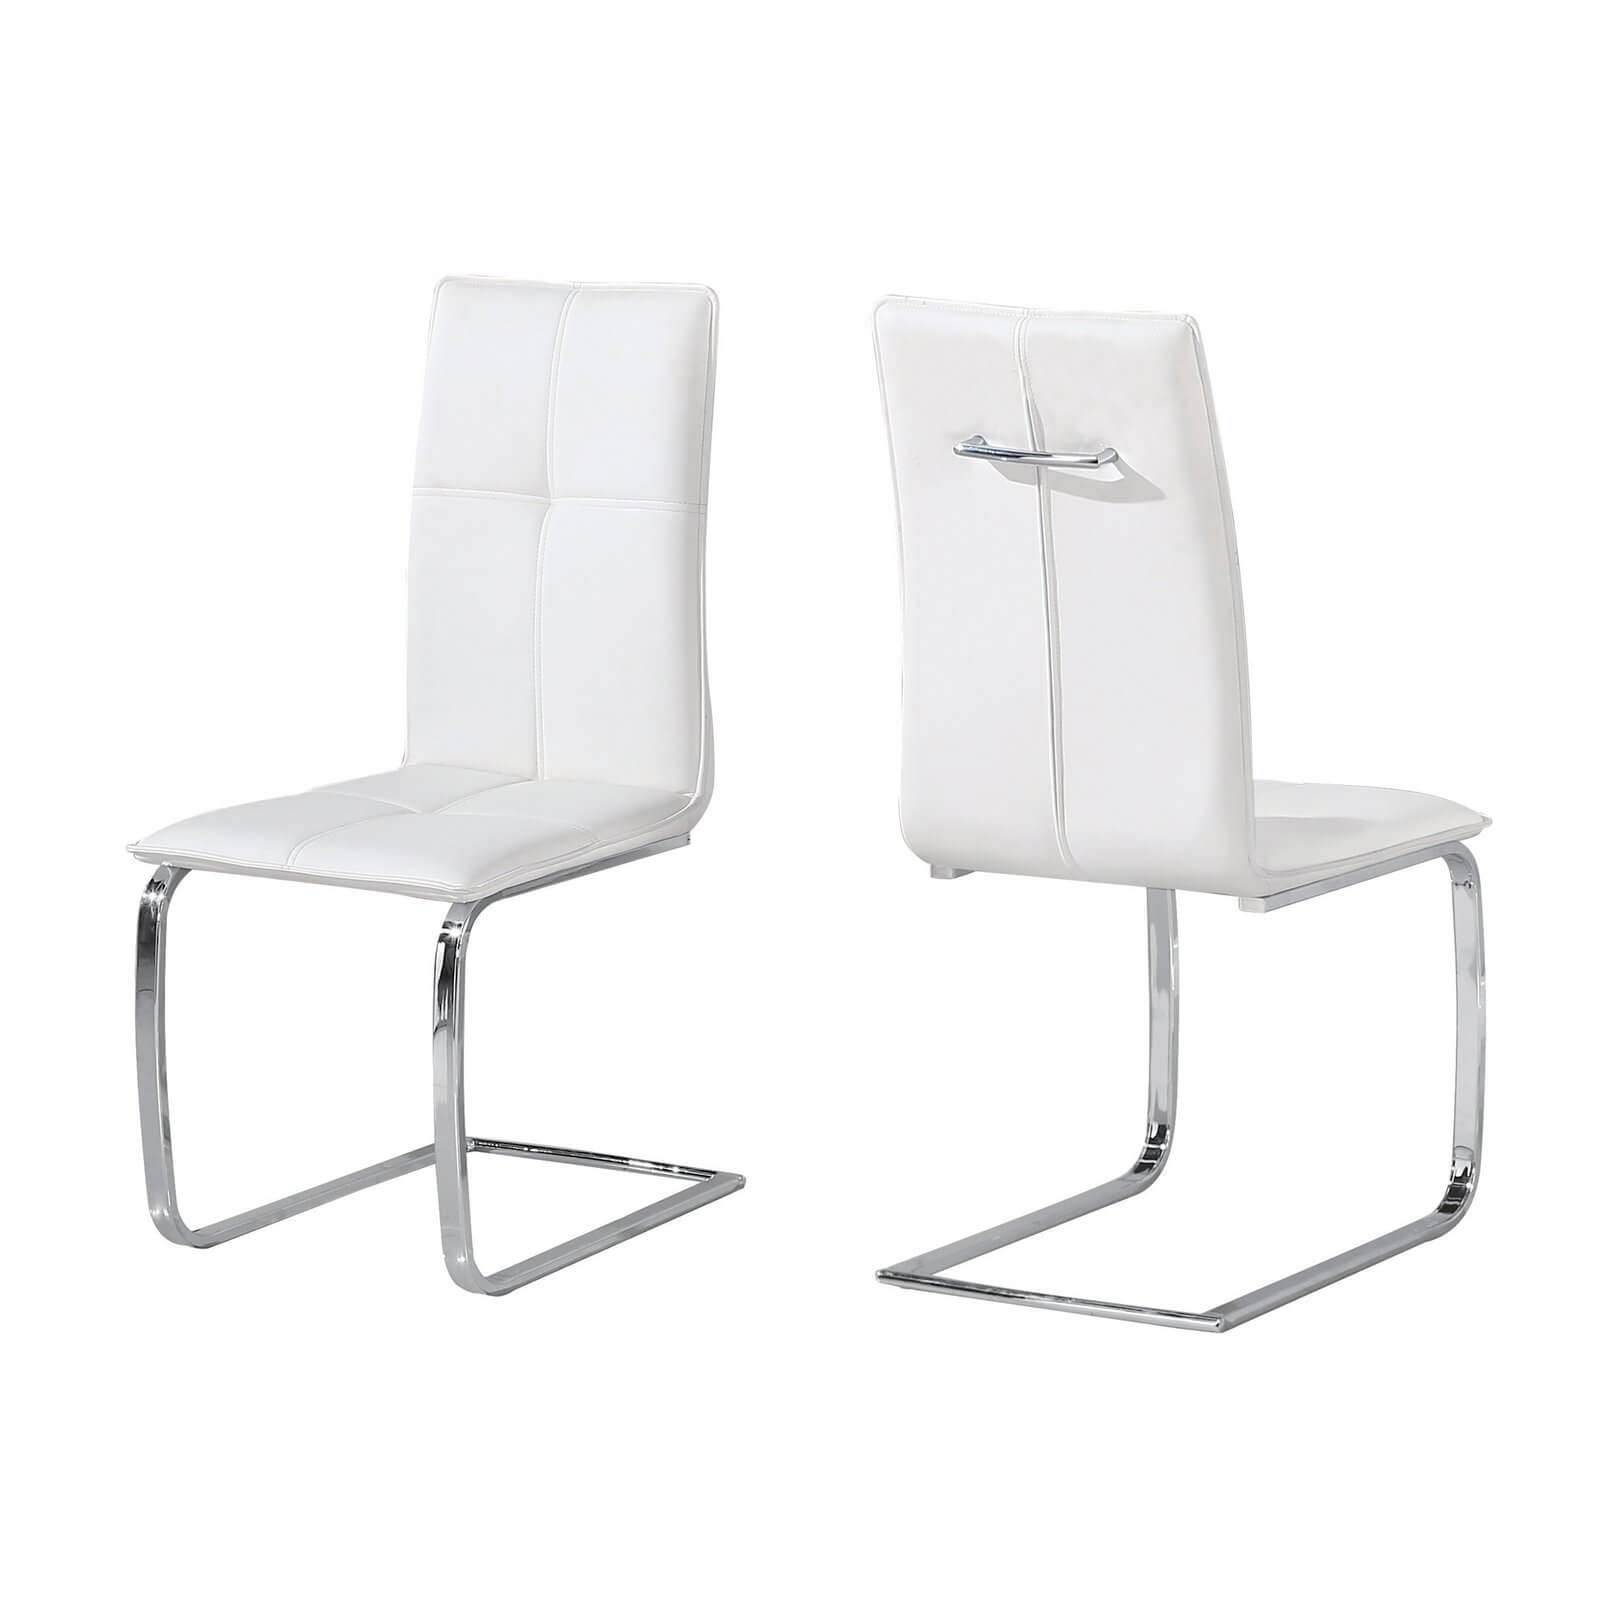 Opus Dining Chair - Set of 2 - White